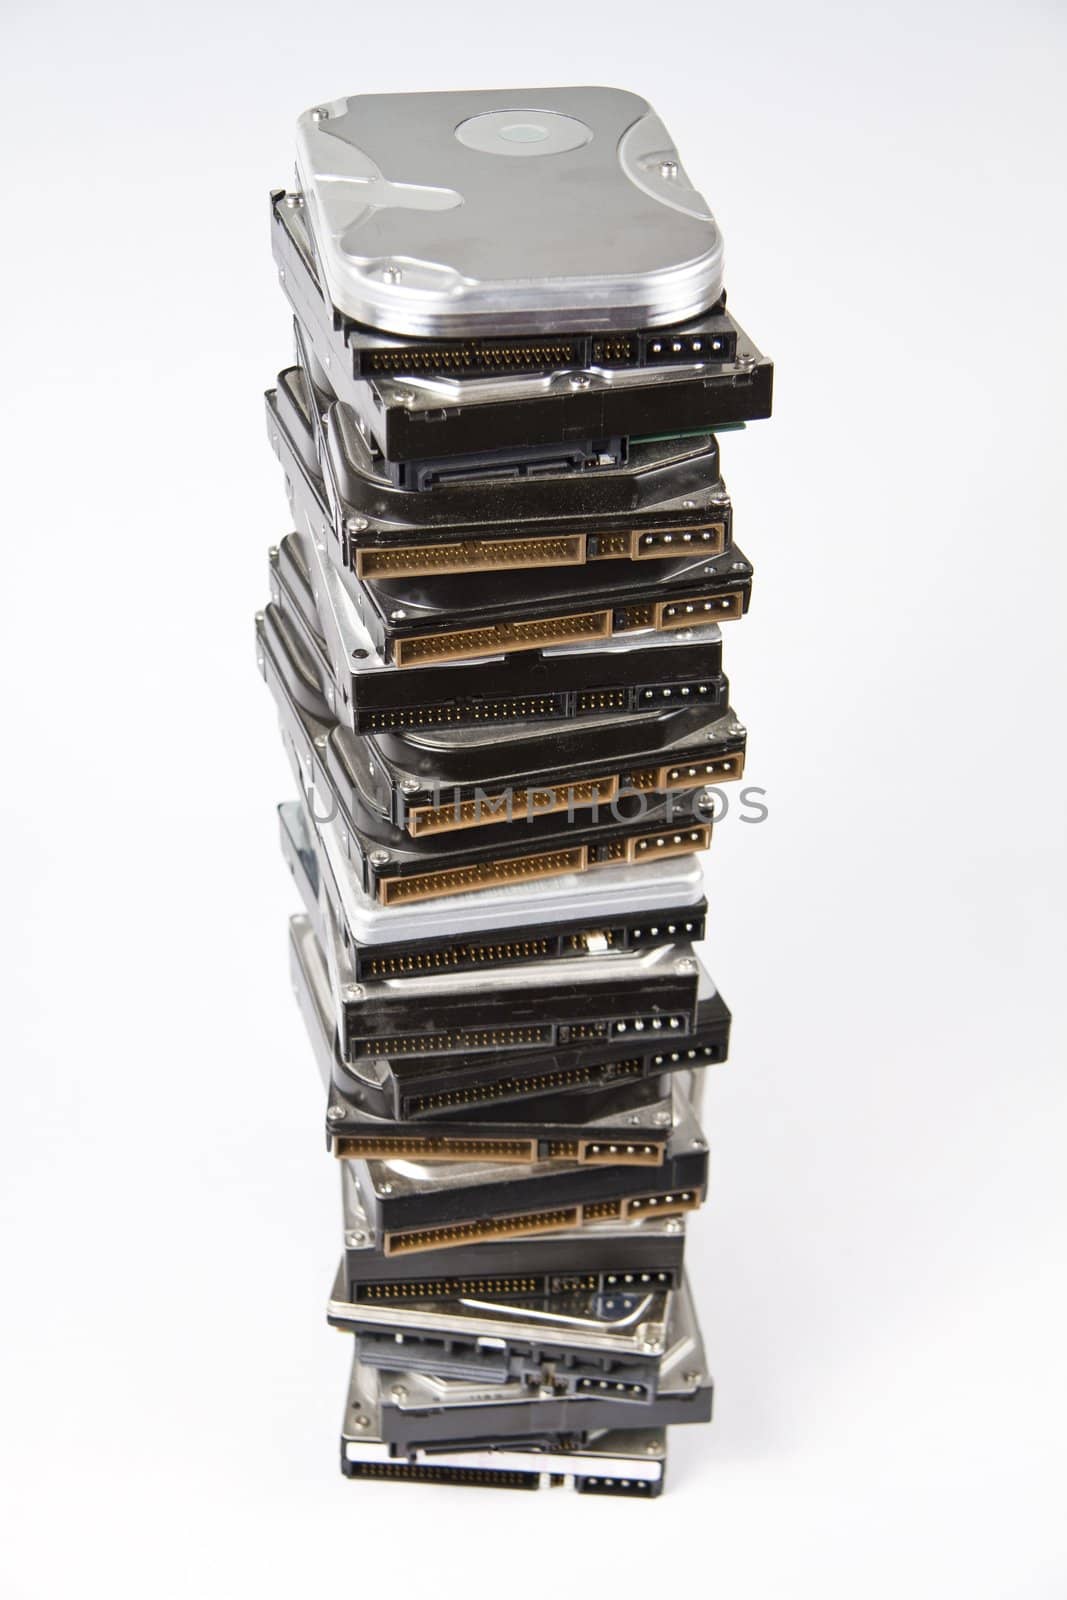 Stack of many different hard drives with opened drives on top.